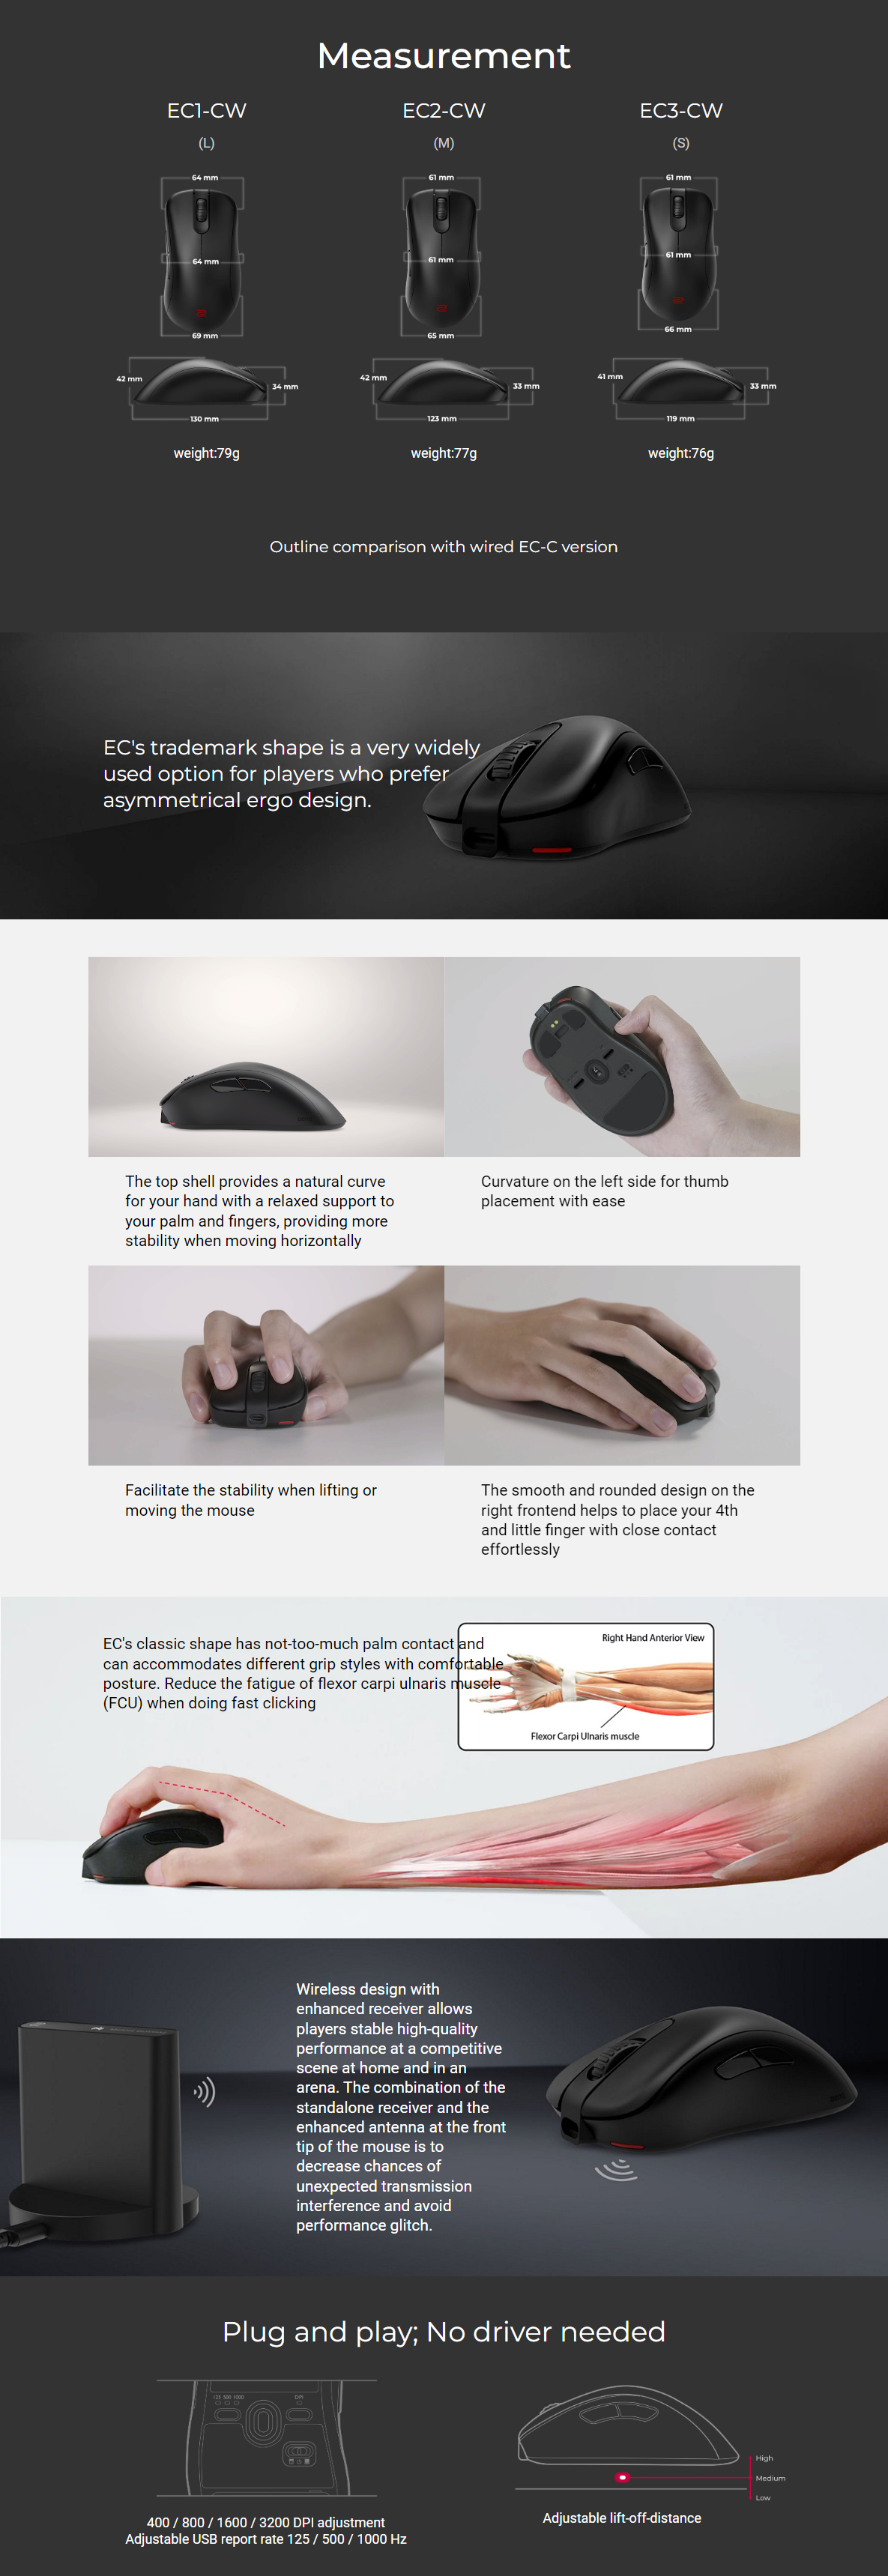 A large marketing image providing additional information about the product BenQ ZOWIE EC3-CW eSports Wireless Gaming Mouse - Additional alt info not provided